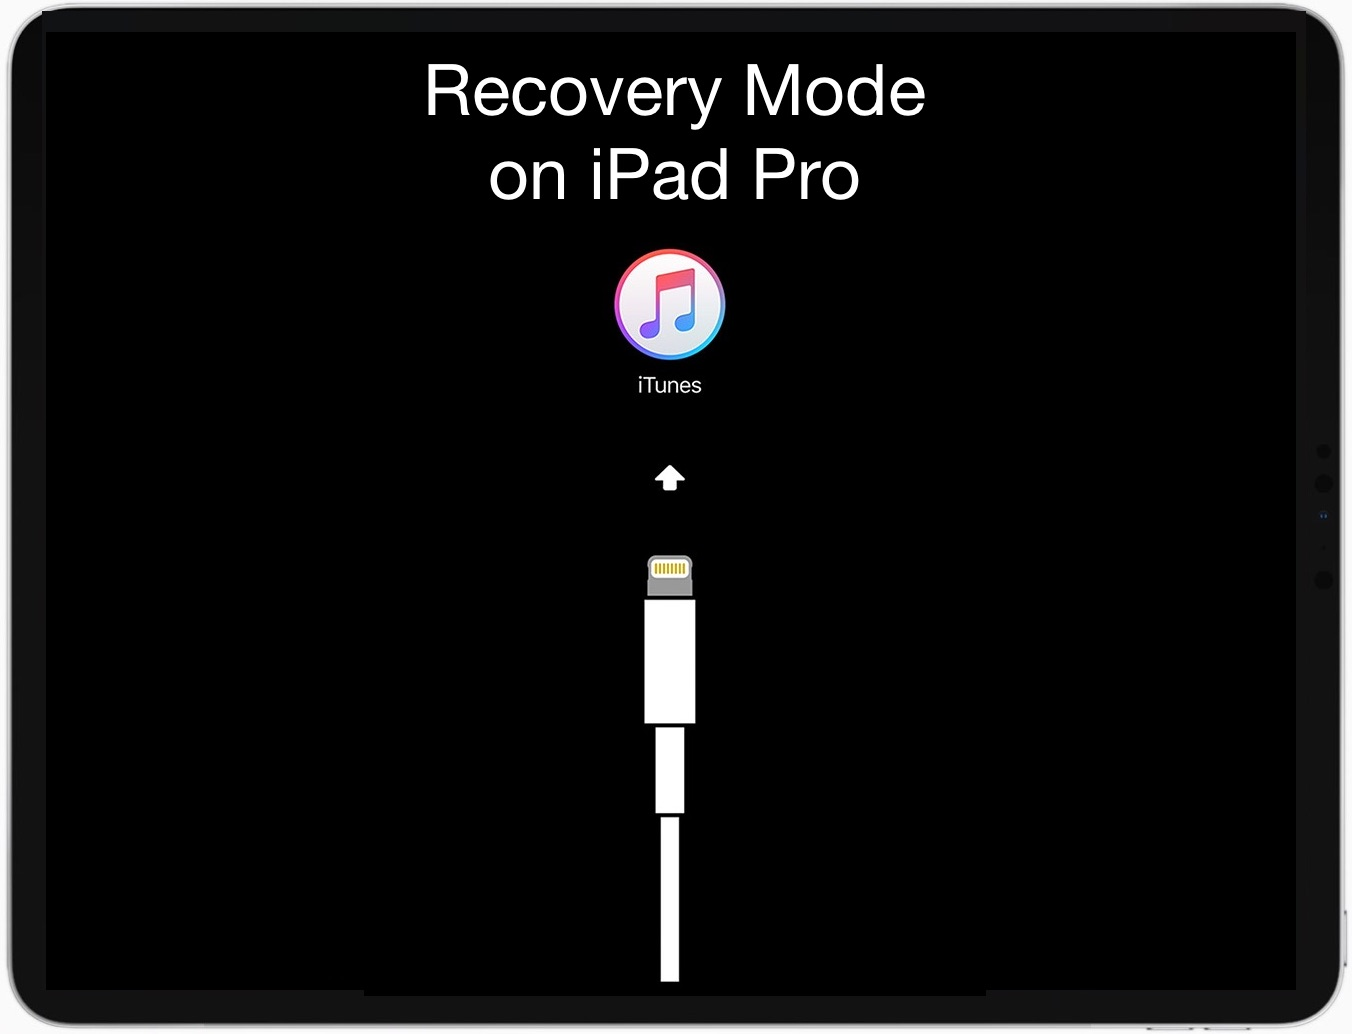  Put your iPad into Recovery Mode